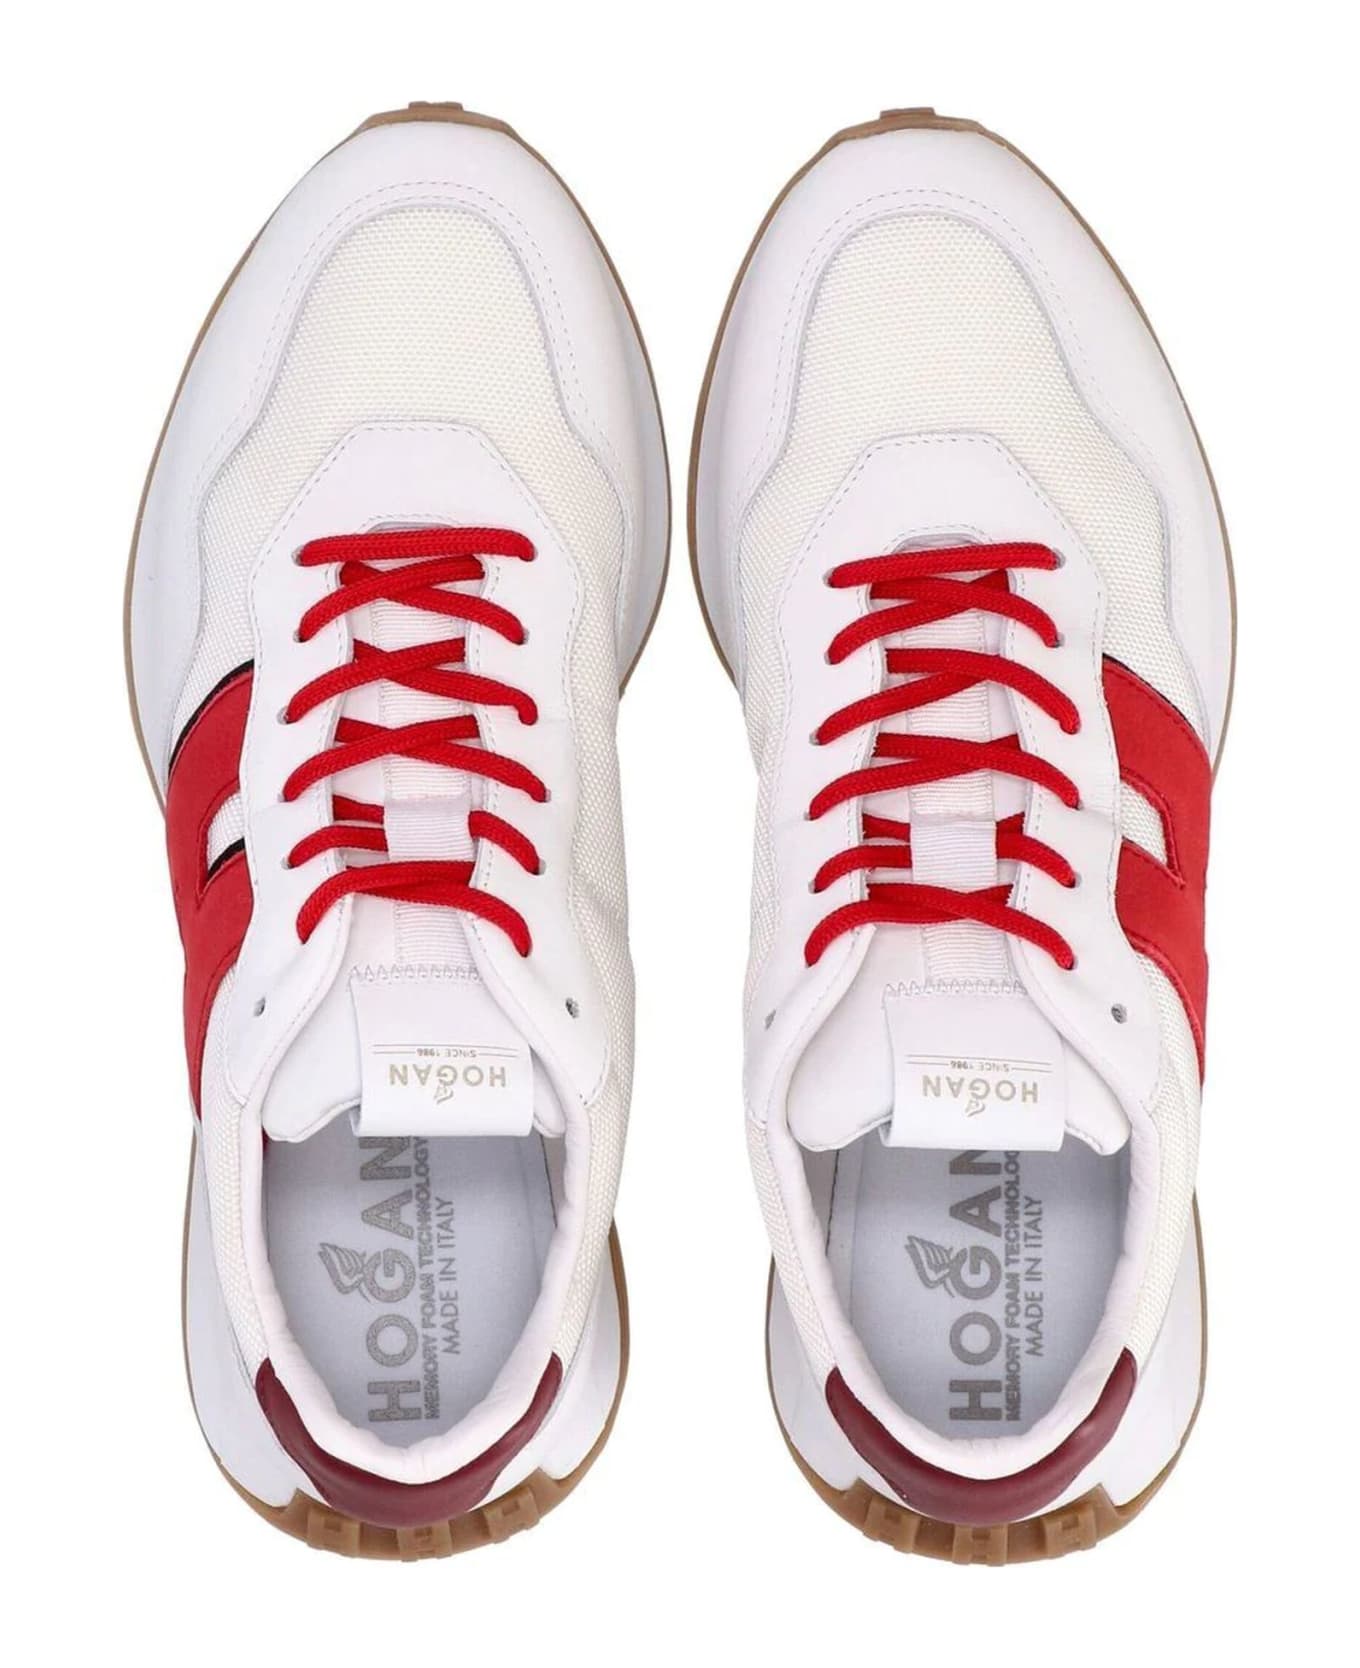 Hogan H601 Sneakers - BIANCO ROSSO